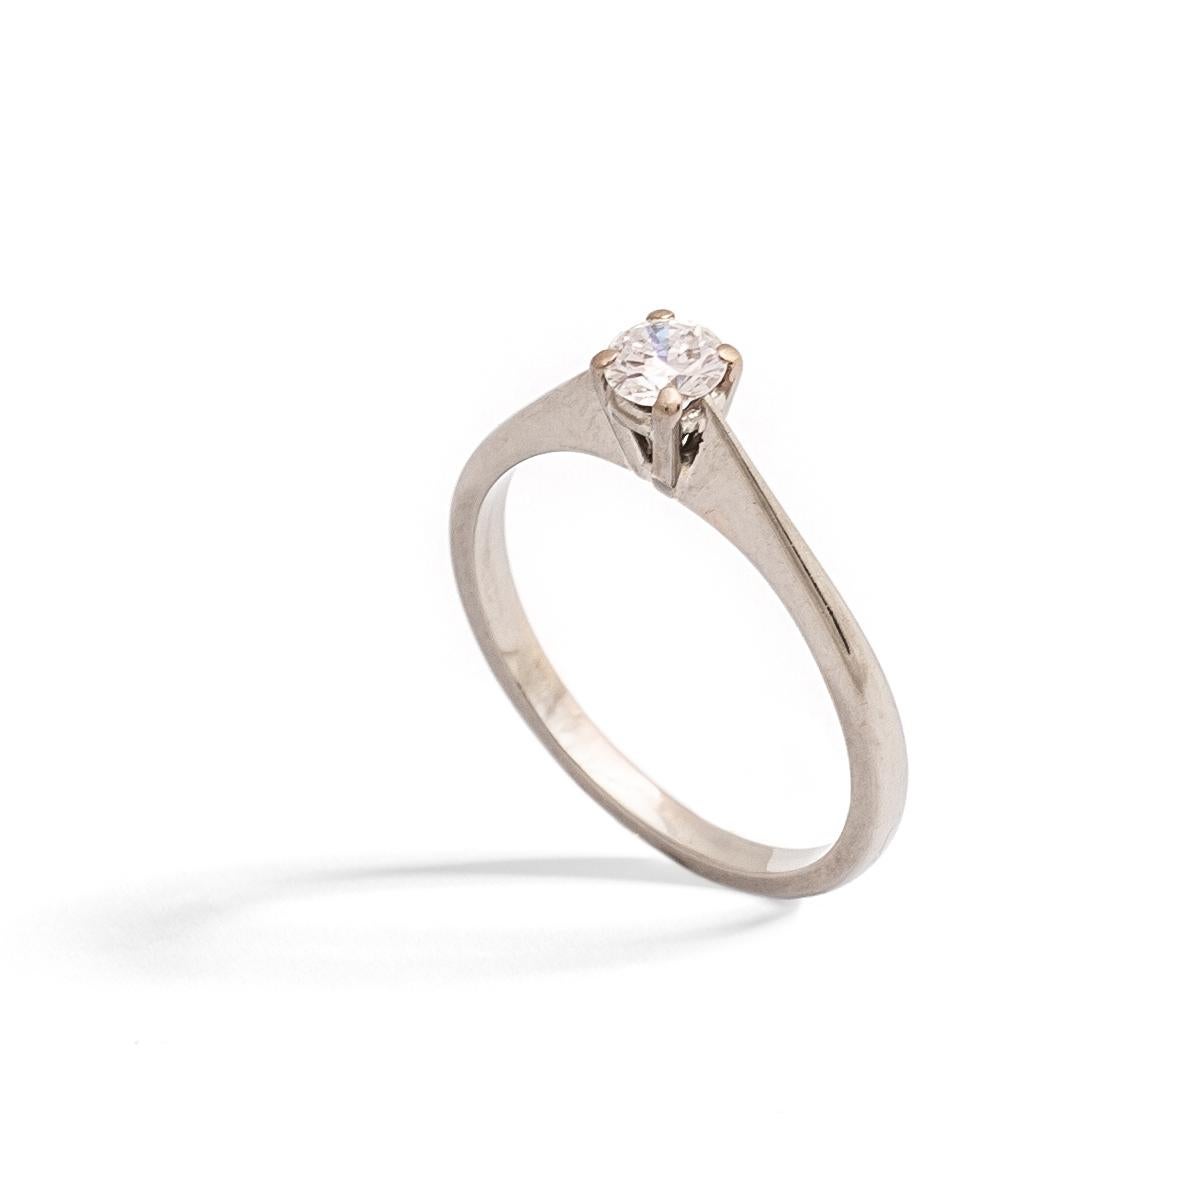 Solitaire Diamond on white gold and platinum Ring.
Diamond estimated weight: 0.25 carat.
Modern cut. Estimated to be G-H color and Vvs clarity.
Diamond Diameter approximately 4.06 millimeters.
Ring Size: 5 3/4.
Gross weight: 2.57 grams.